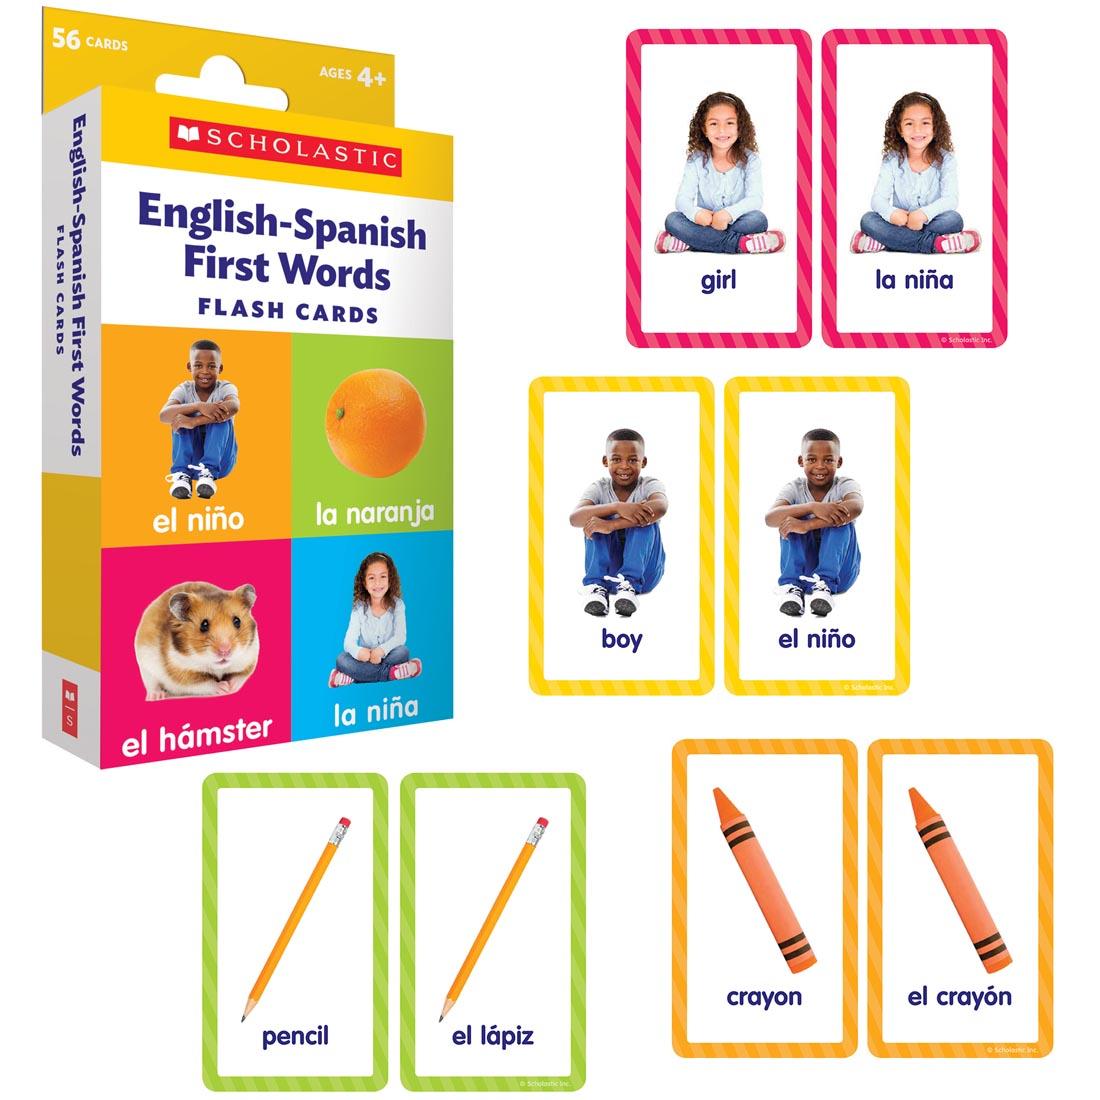 Box of English-Spanish First Words Flash Cards by Scholastic shown beside 4 examples of word pairs